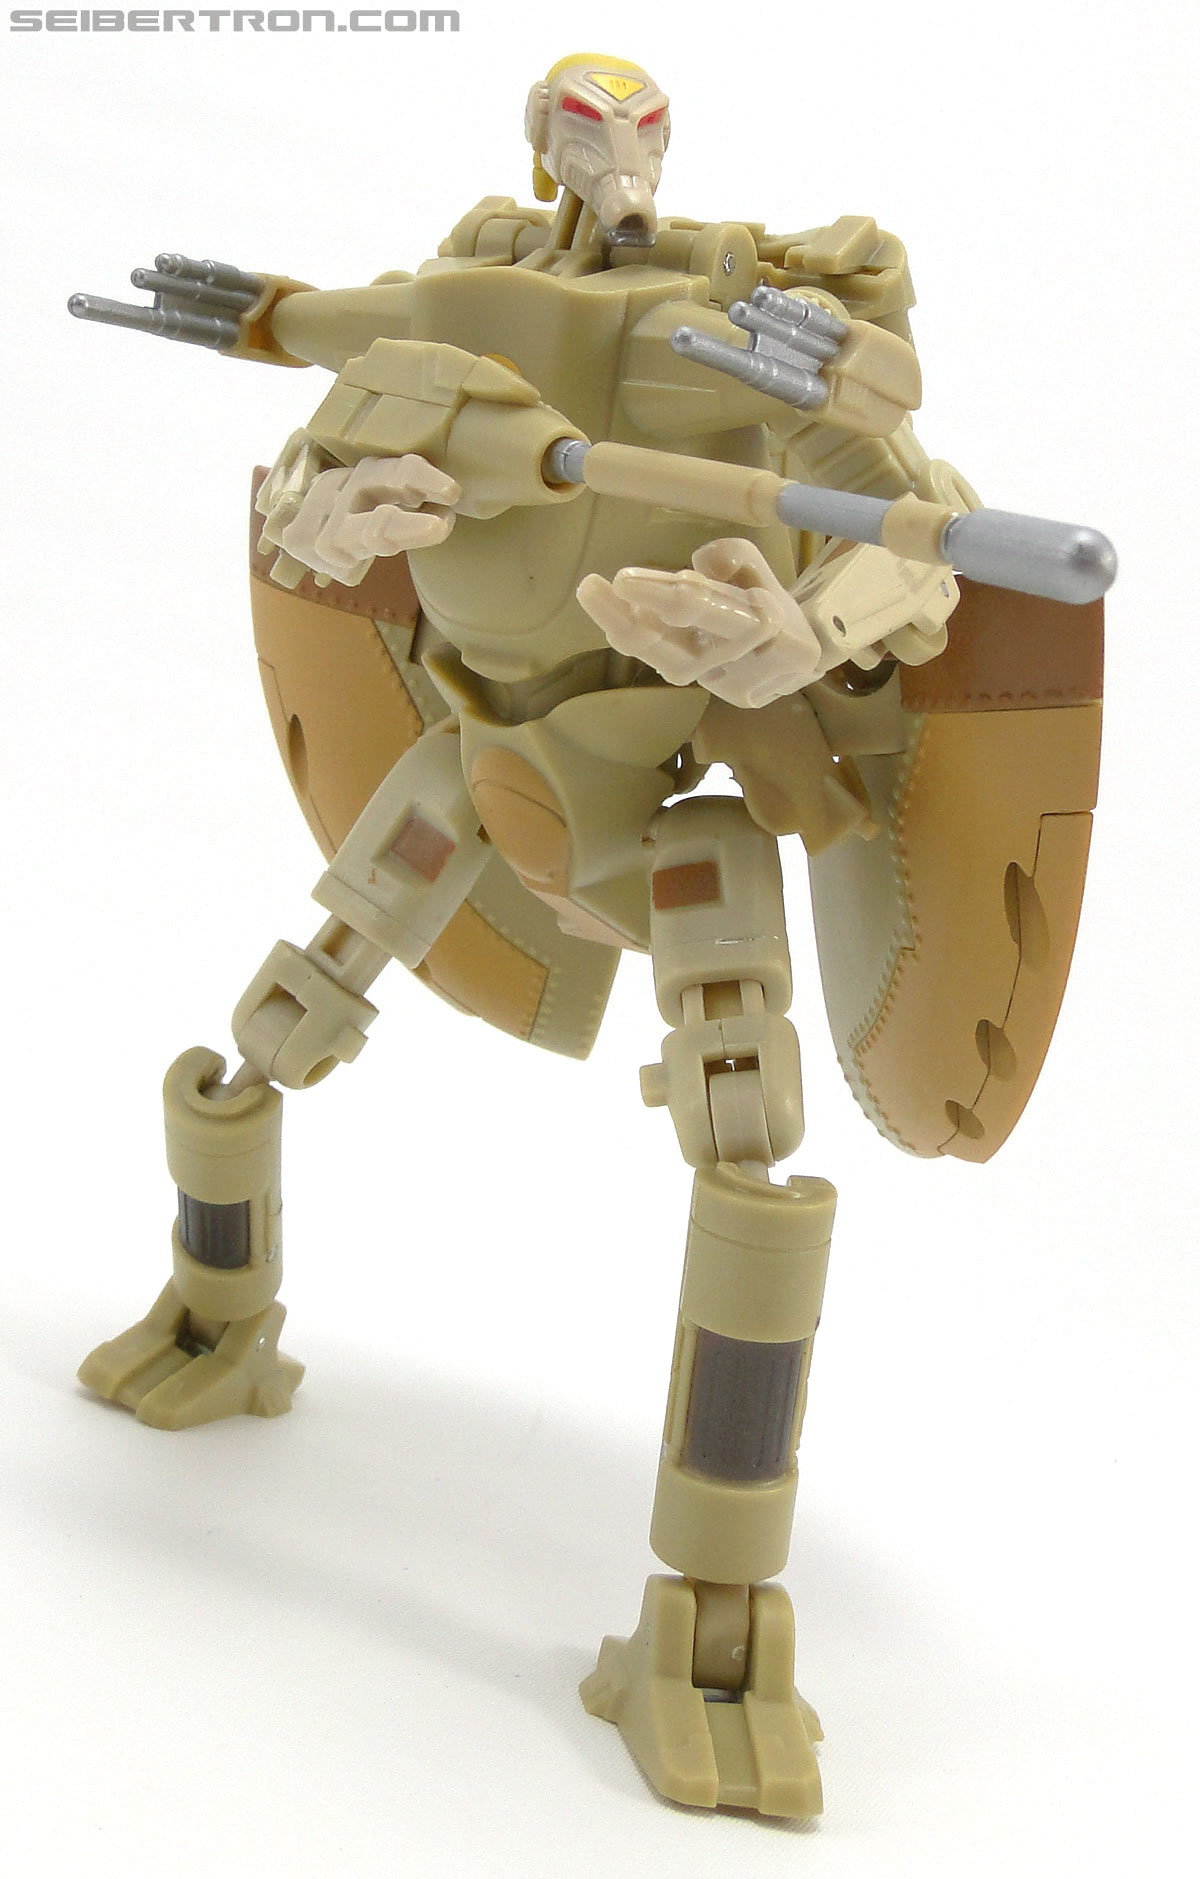 Star Wars Transformers Battle Droid Commader (Armored Assault Tank) (Battle Droid Commader) (Image #65 of 85)